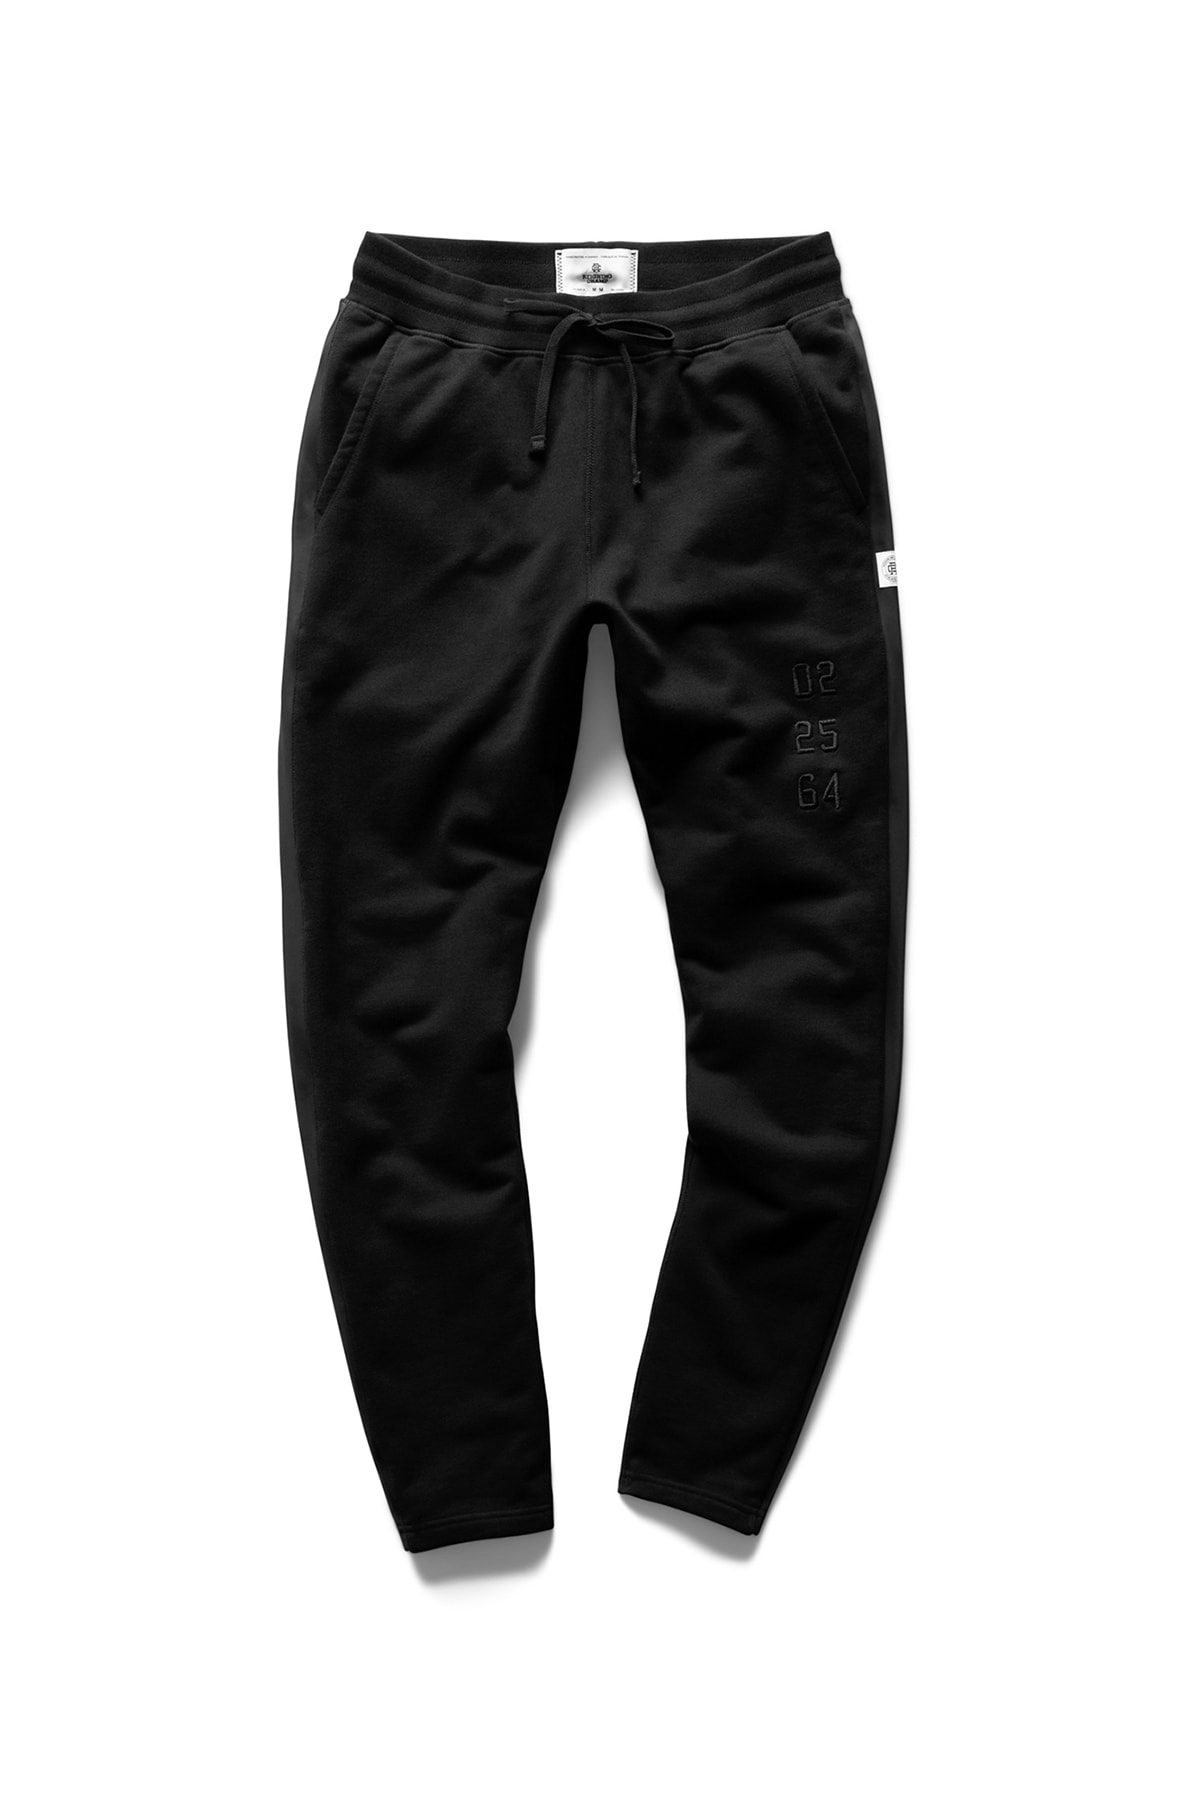 muhammad ali cassius clay reigning champ collaboration august 2 2018 black sweat pants